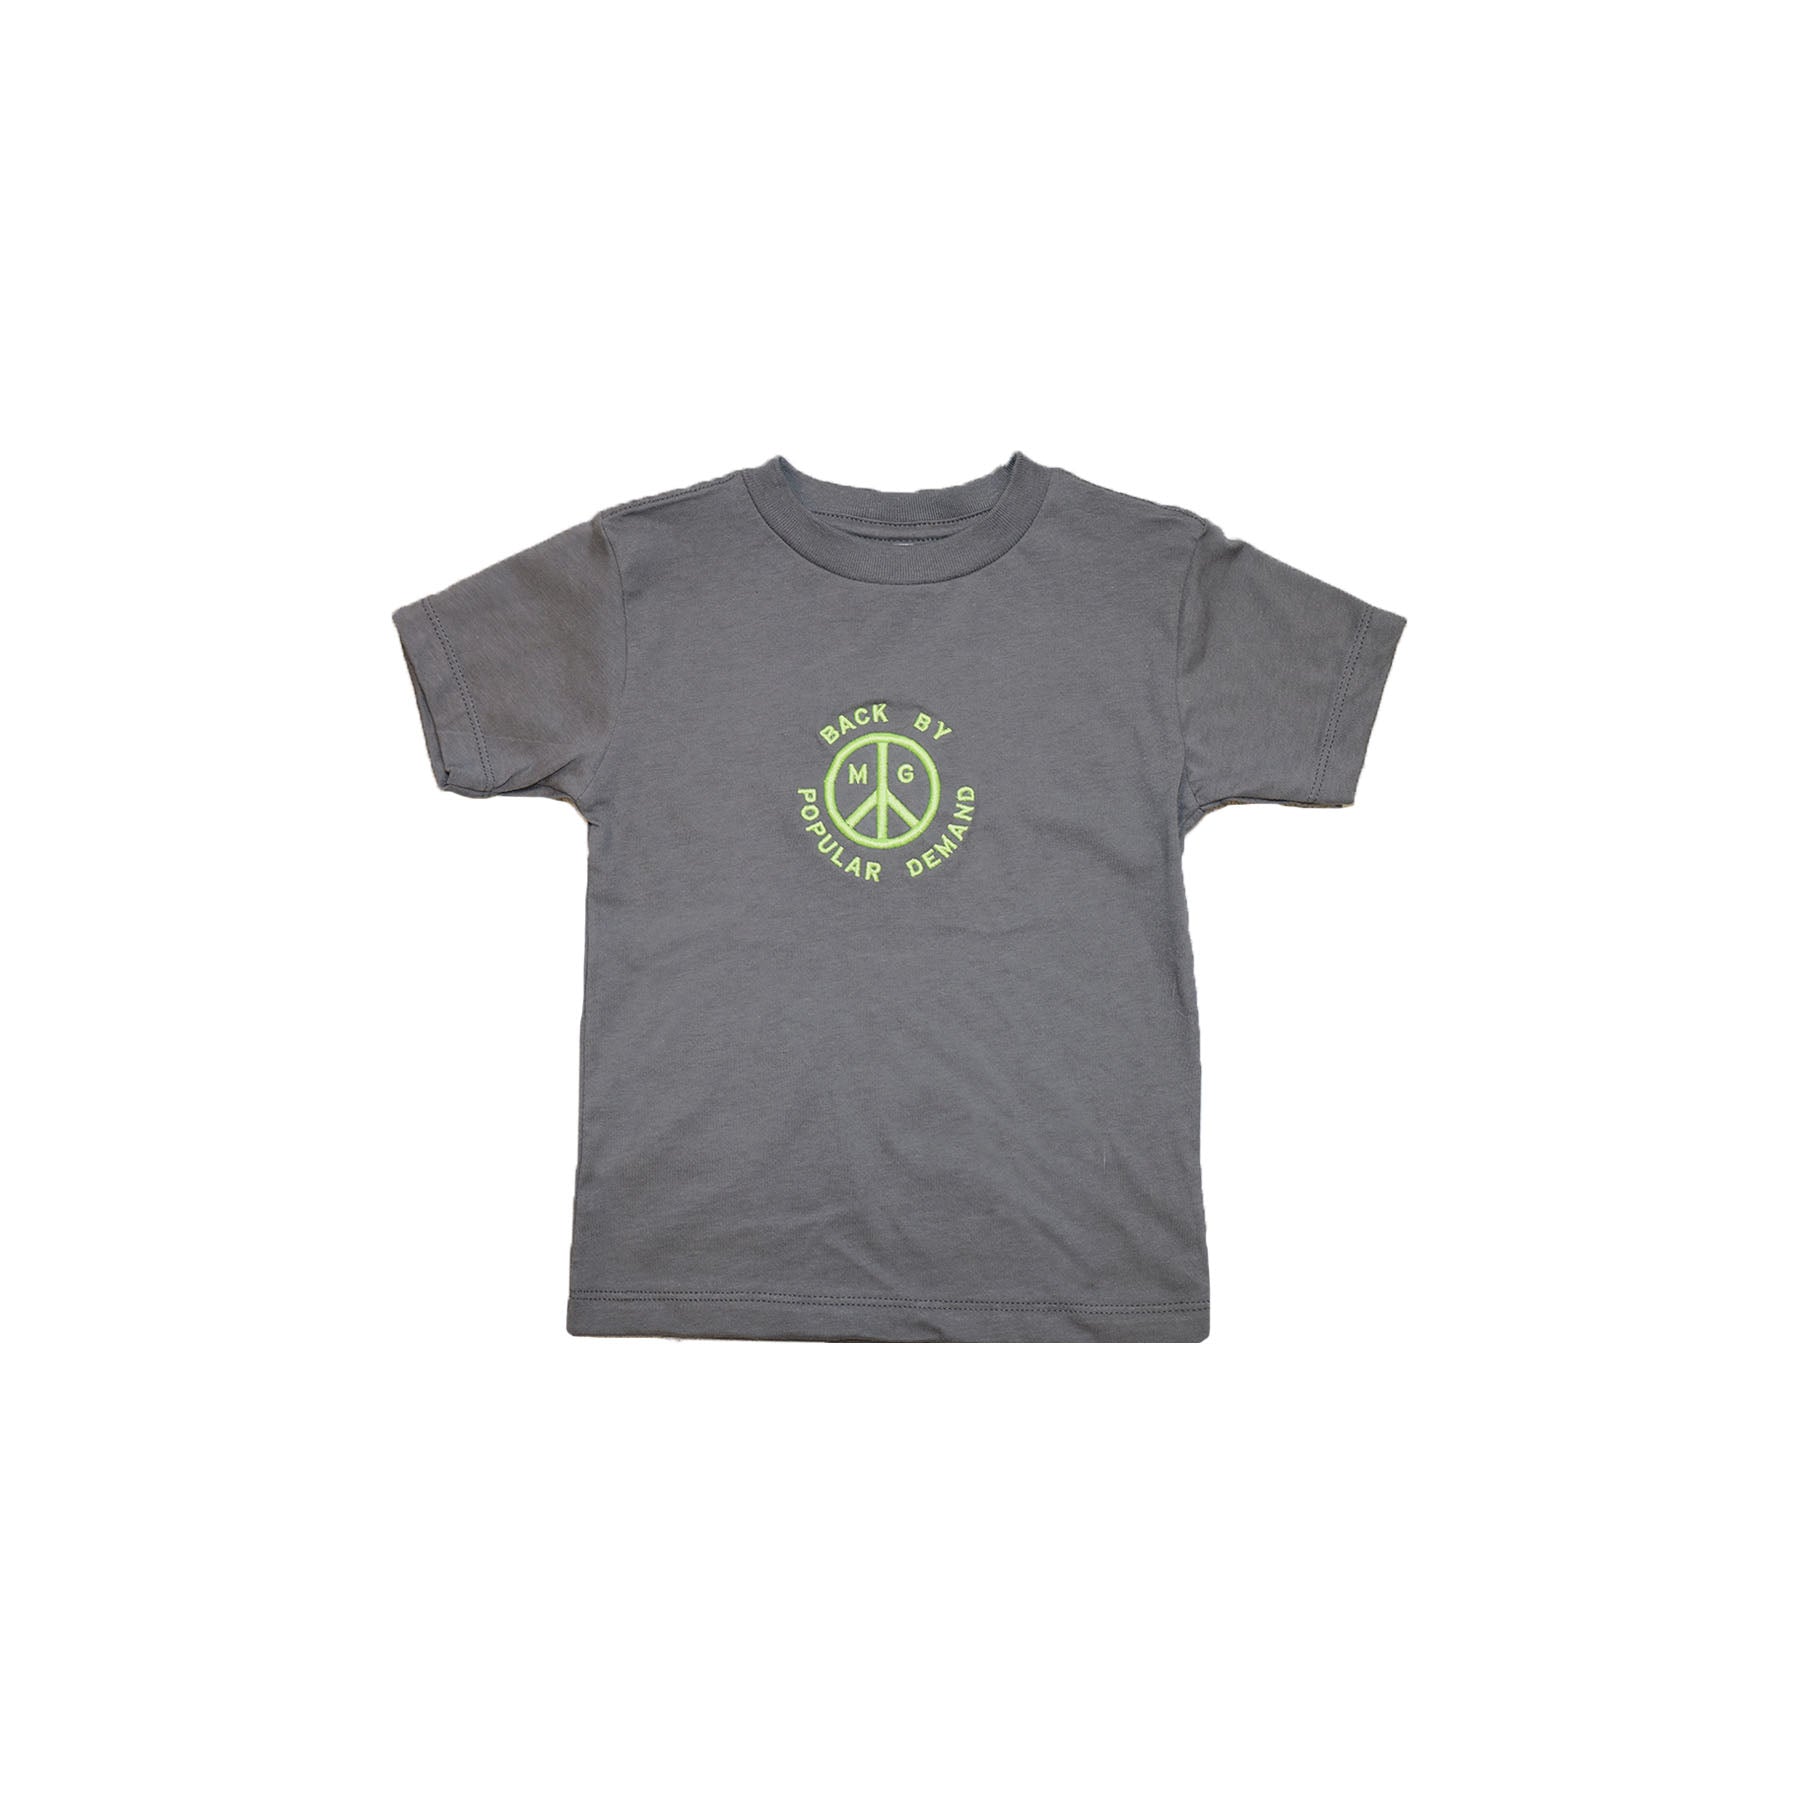 Back by Popular Demand Toddler Tee - Washed Grey-Mister Green-Mister Green